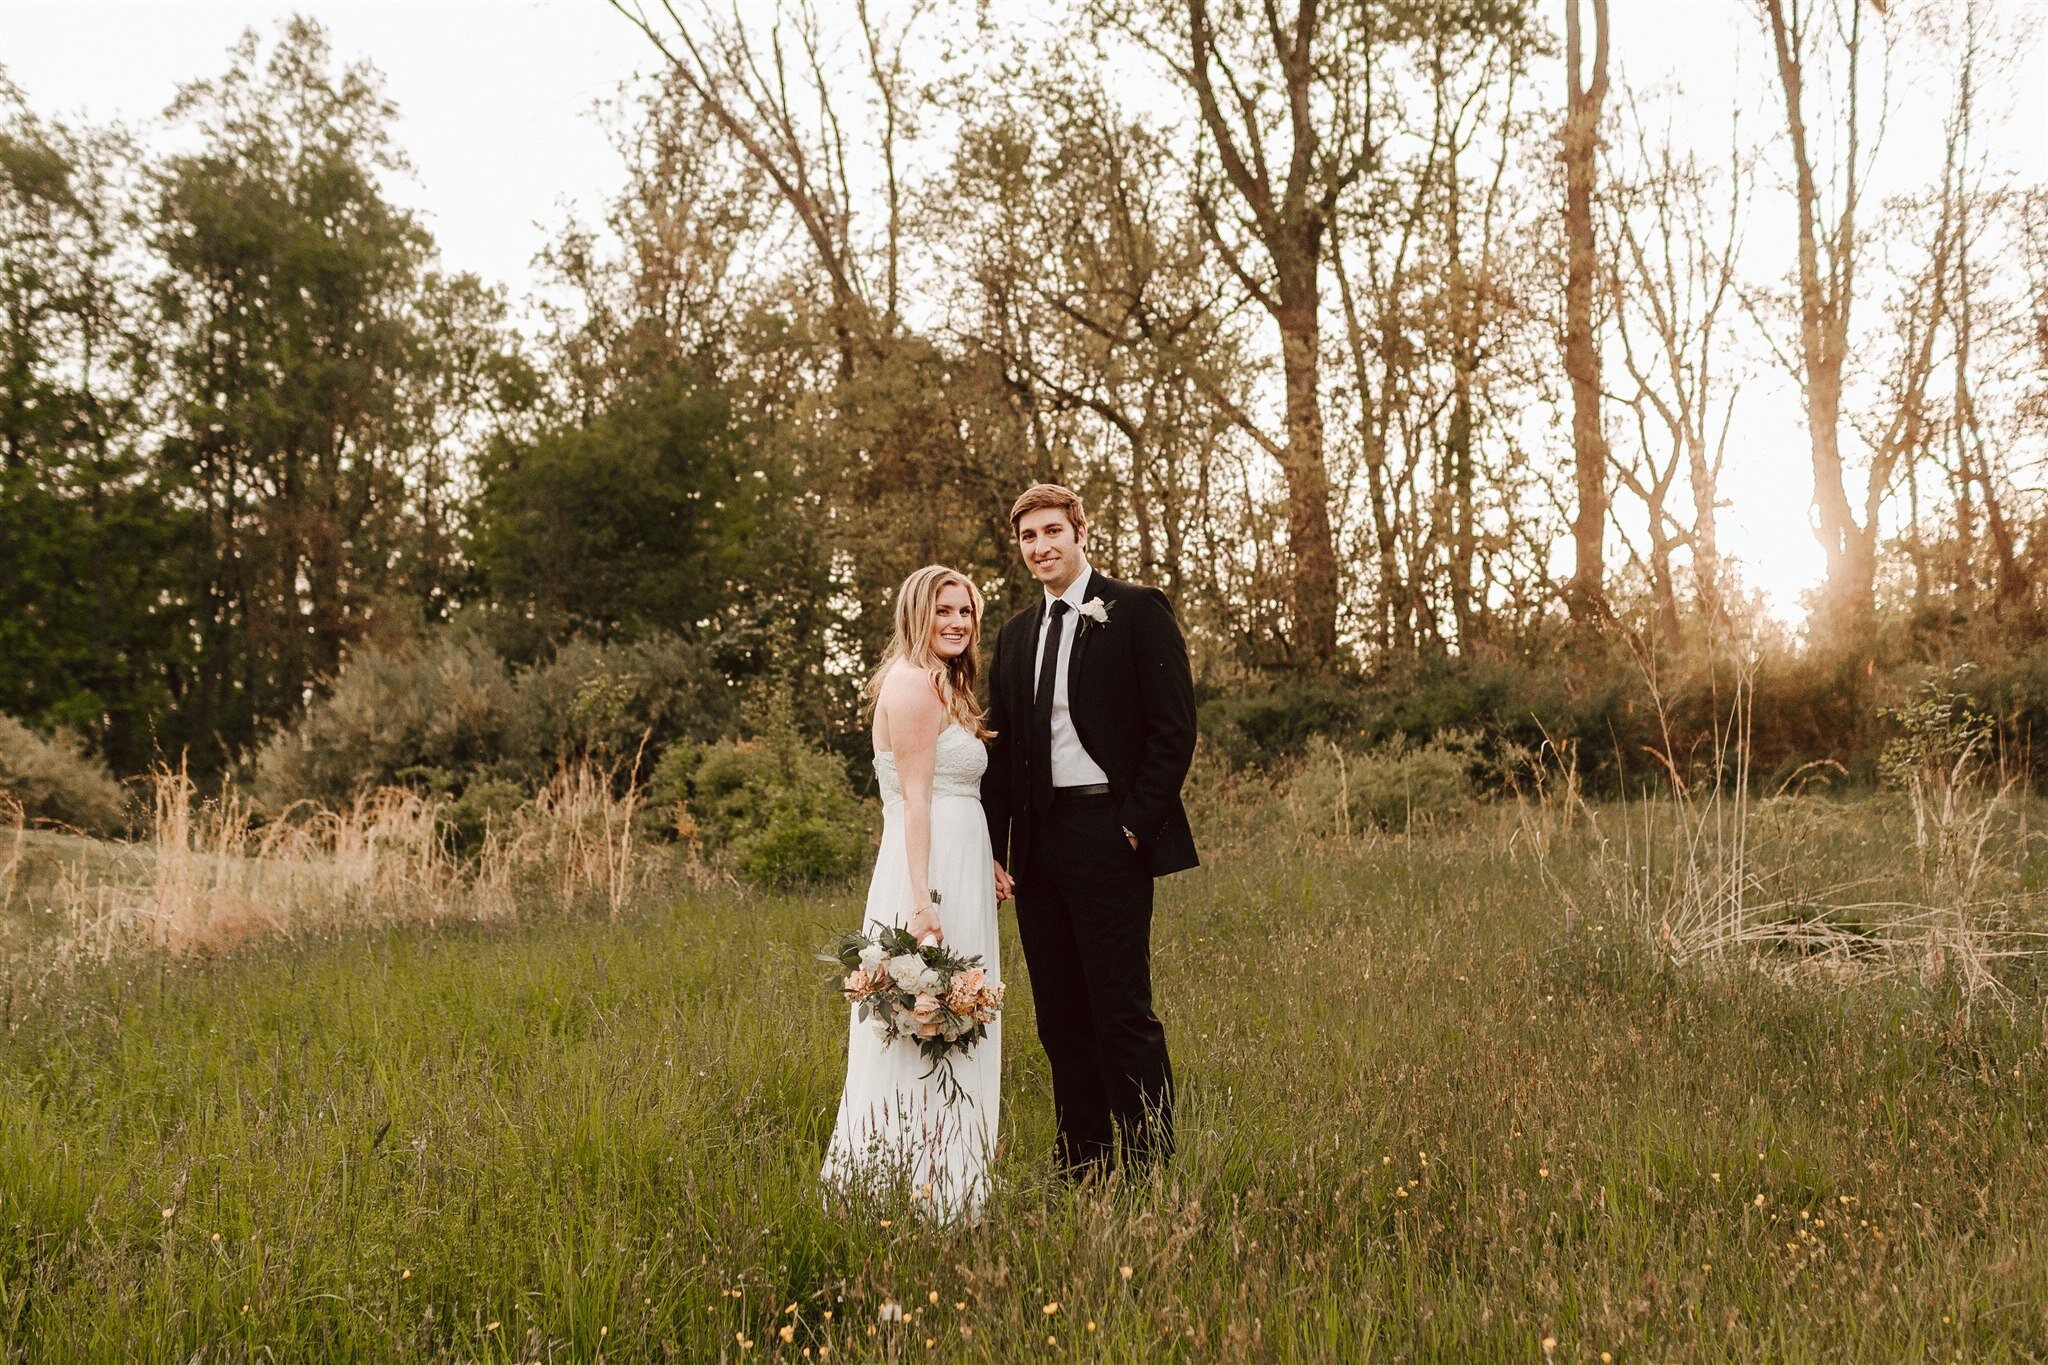 Kate and Adam’s journey to their wedding was anything but traditional! With their original plans for a large reception being dashed by Covid-19, So they eloped at their venue, HollyHedge in New Hope, PA surrounded by family and friends. Photographed…